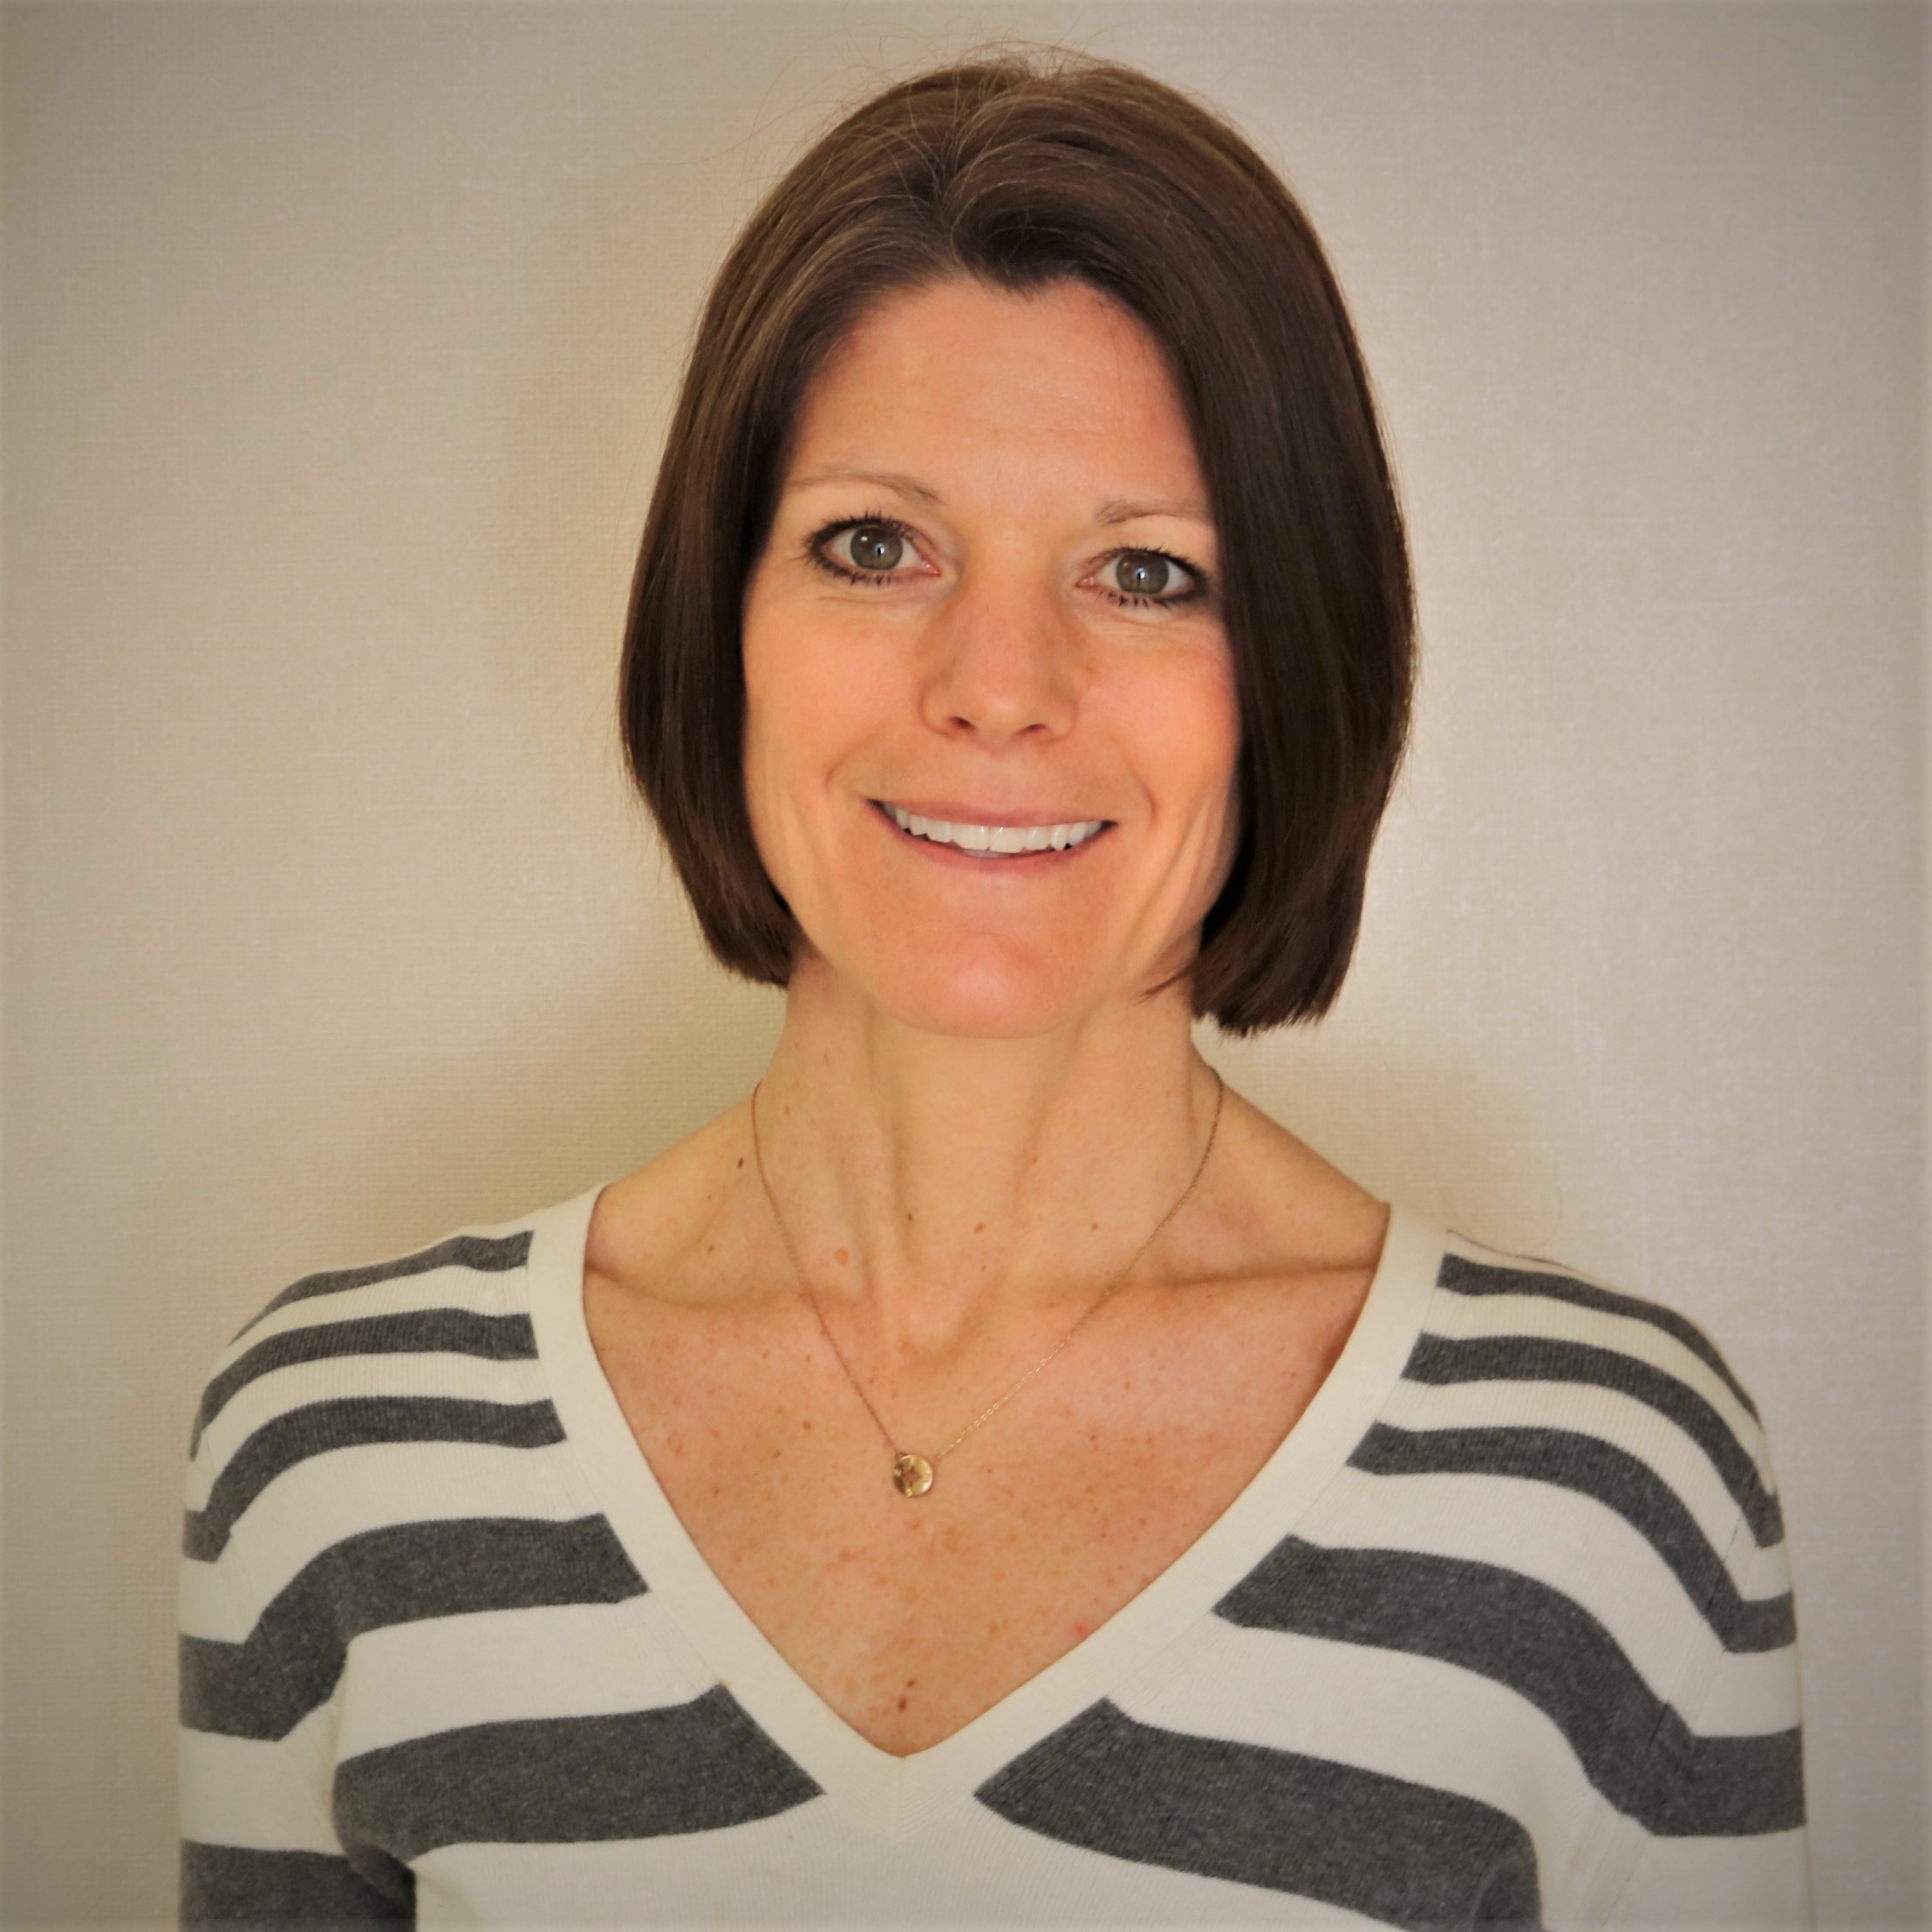 Jill Andersen, MPT, NBC-HWC, physical therapist for Red Lake Hospital, Indian Health Service